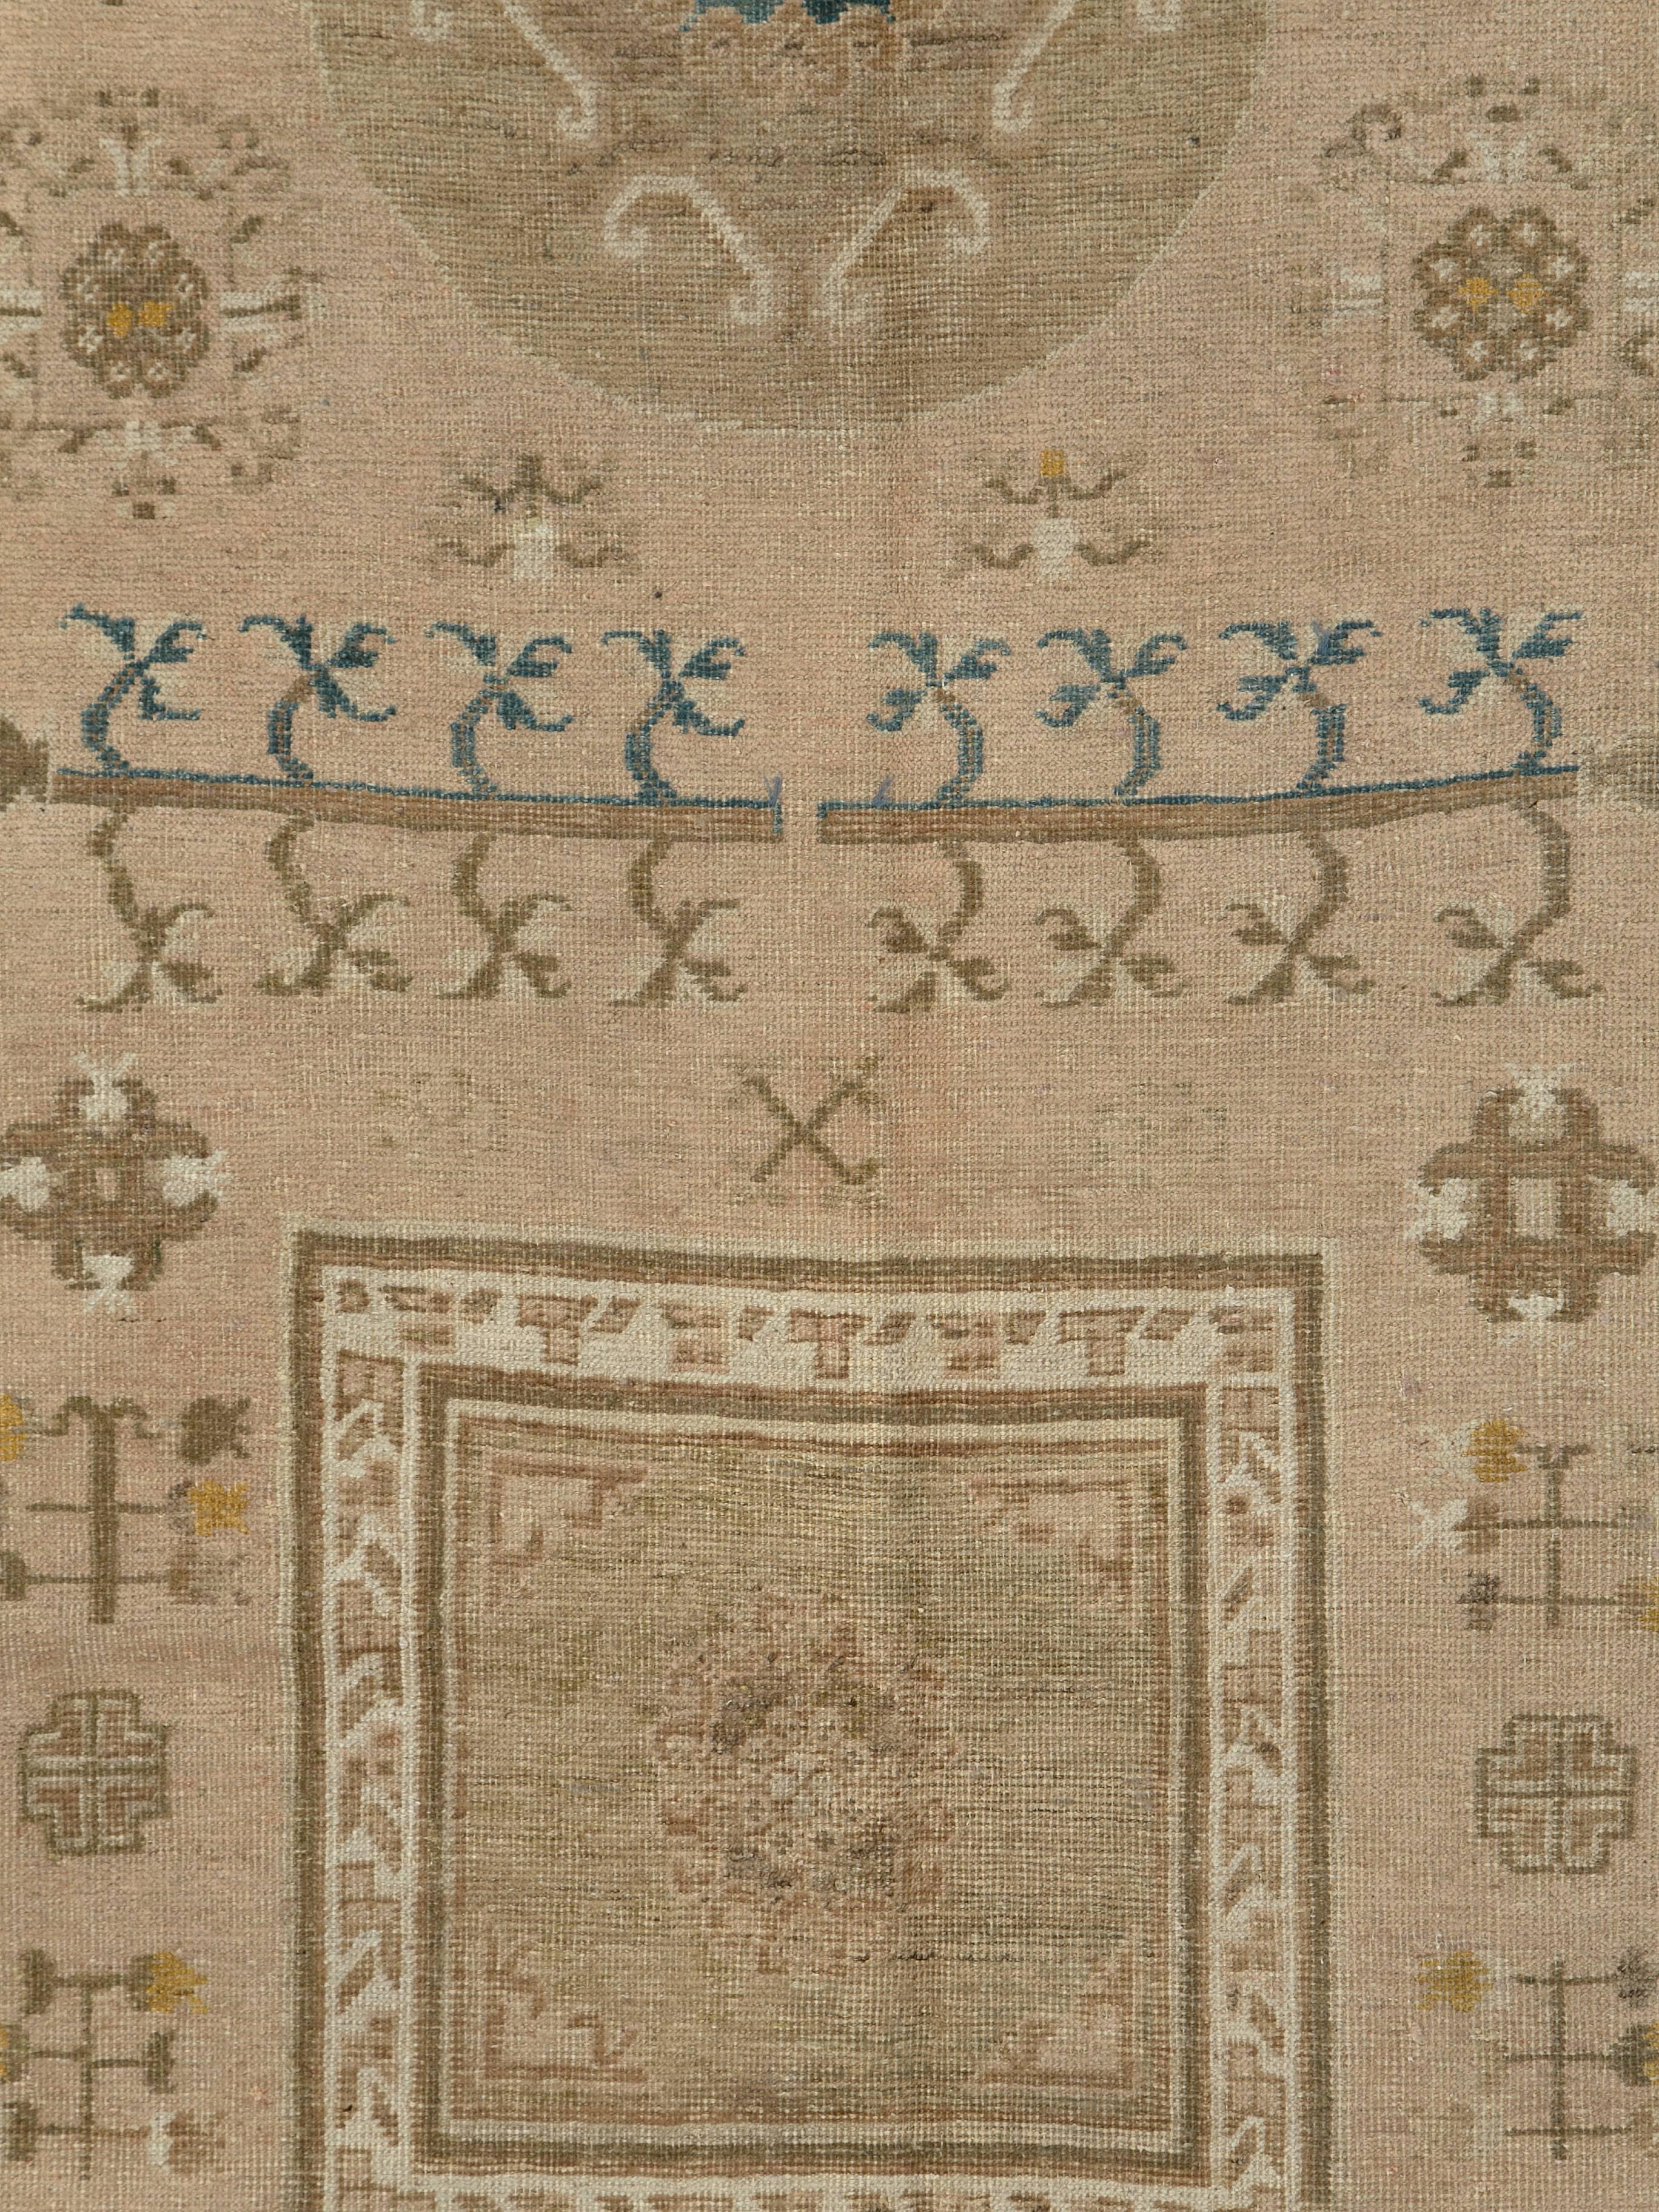 An antique East Turkestan Khotan carpet from the first quarter of the 20th century.